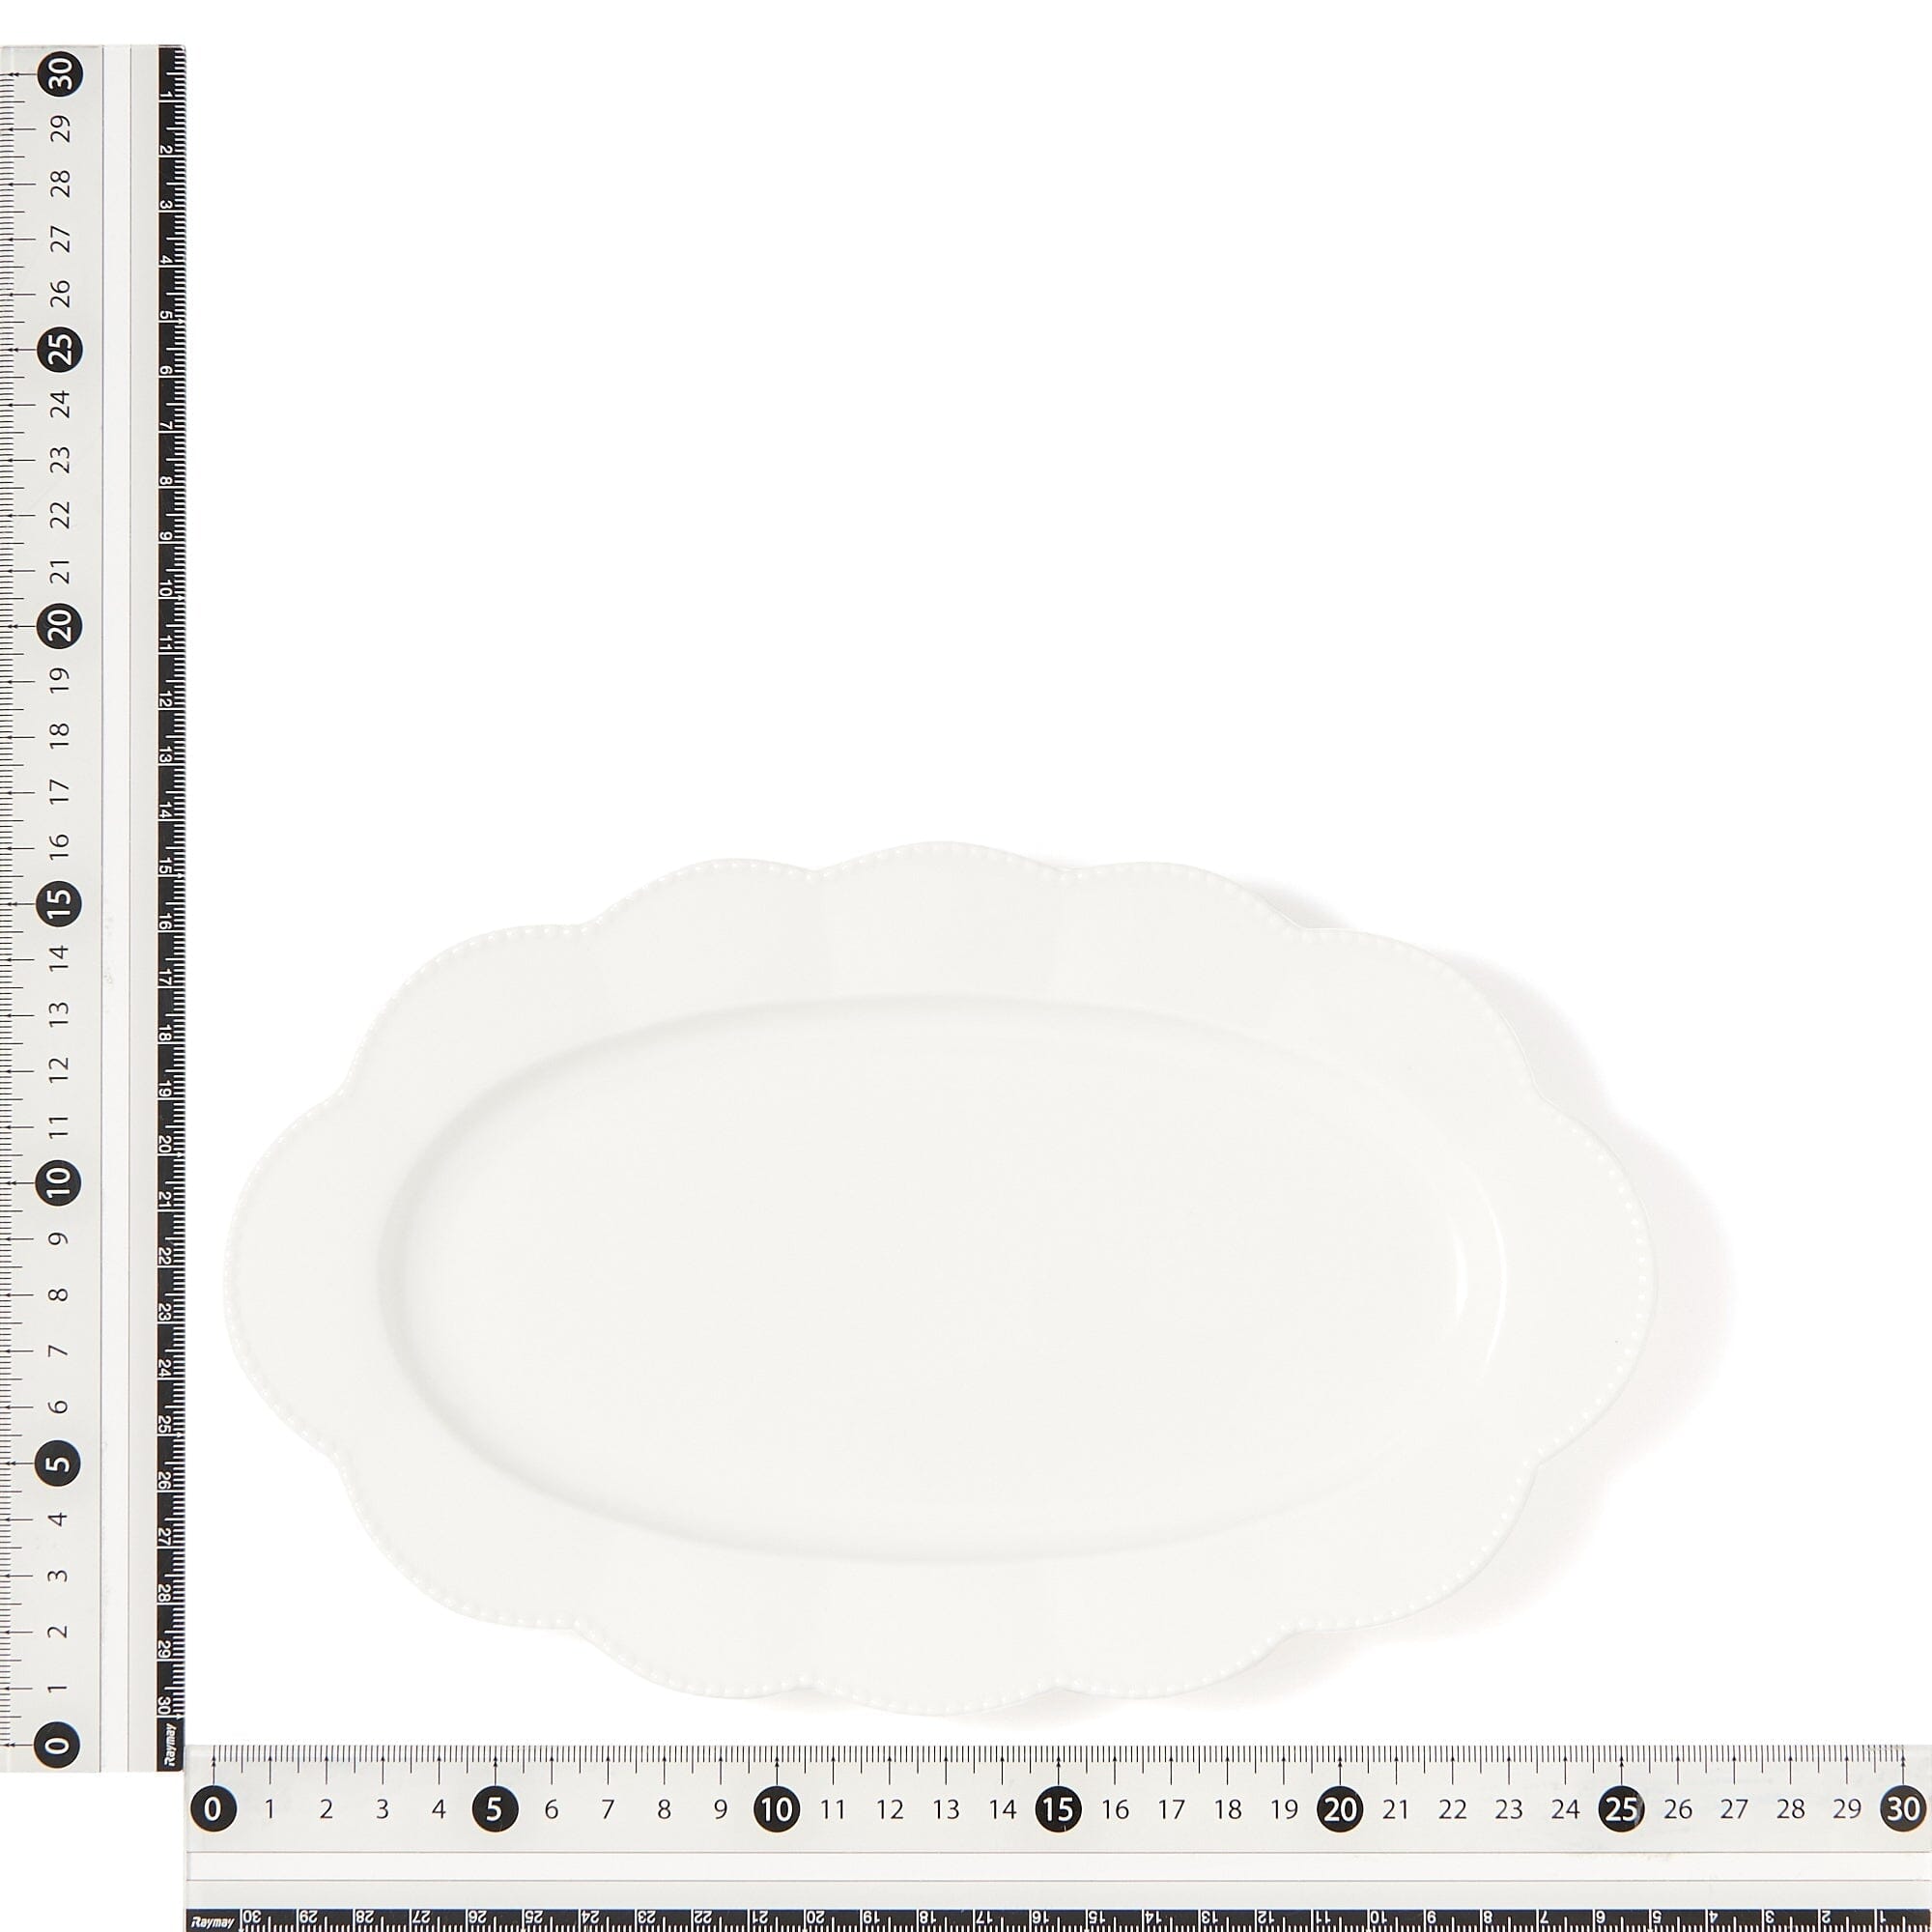 Blanche Oval Plate Flower  White